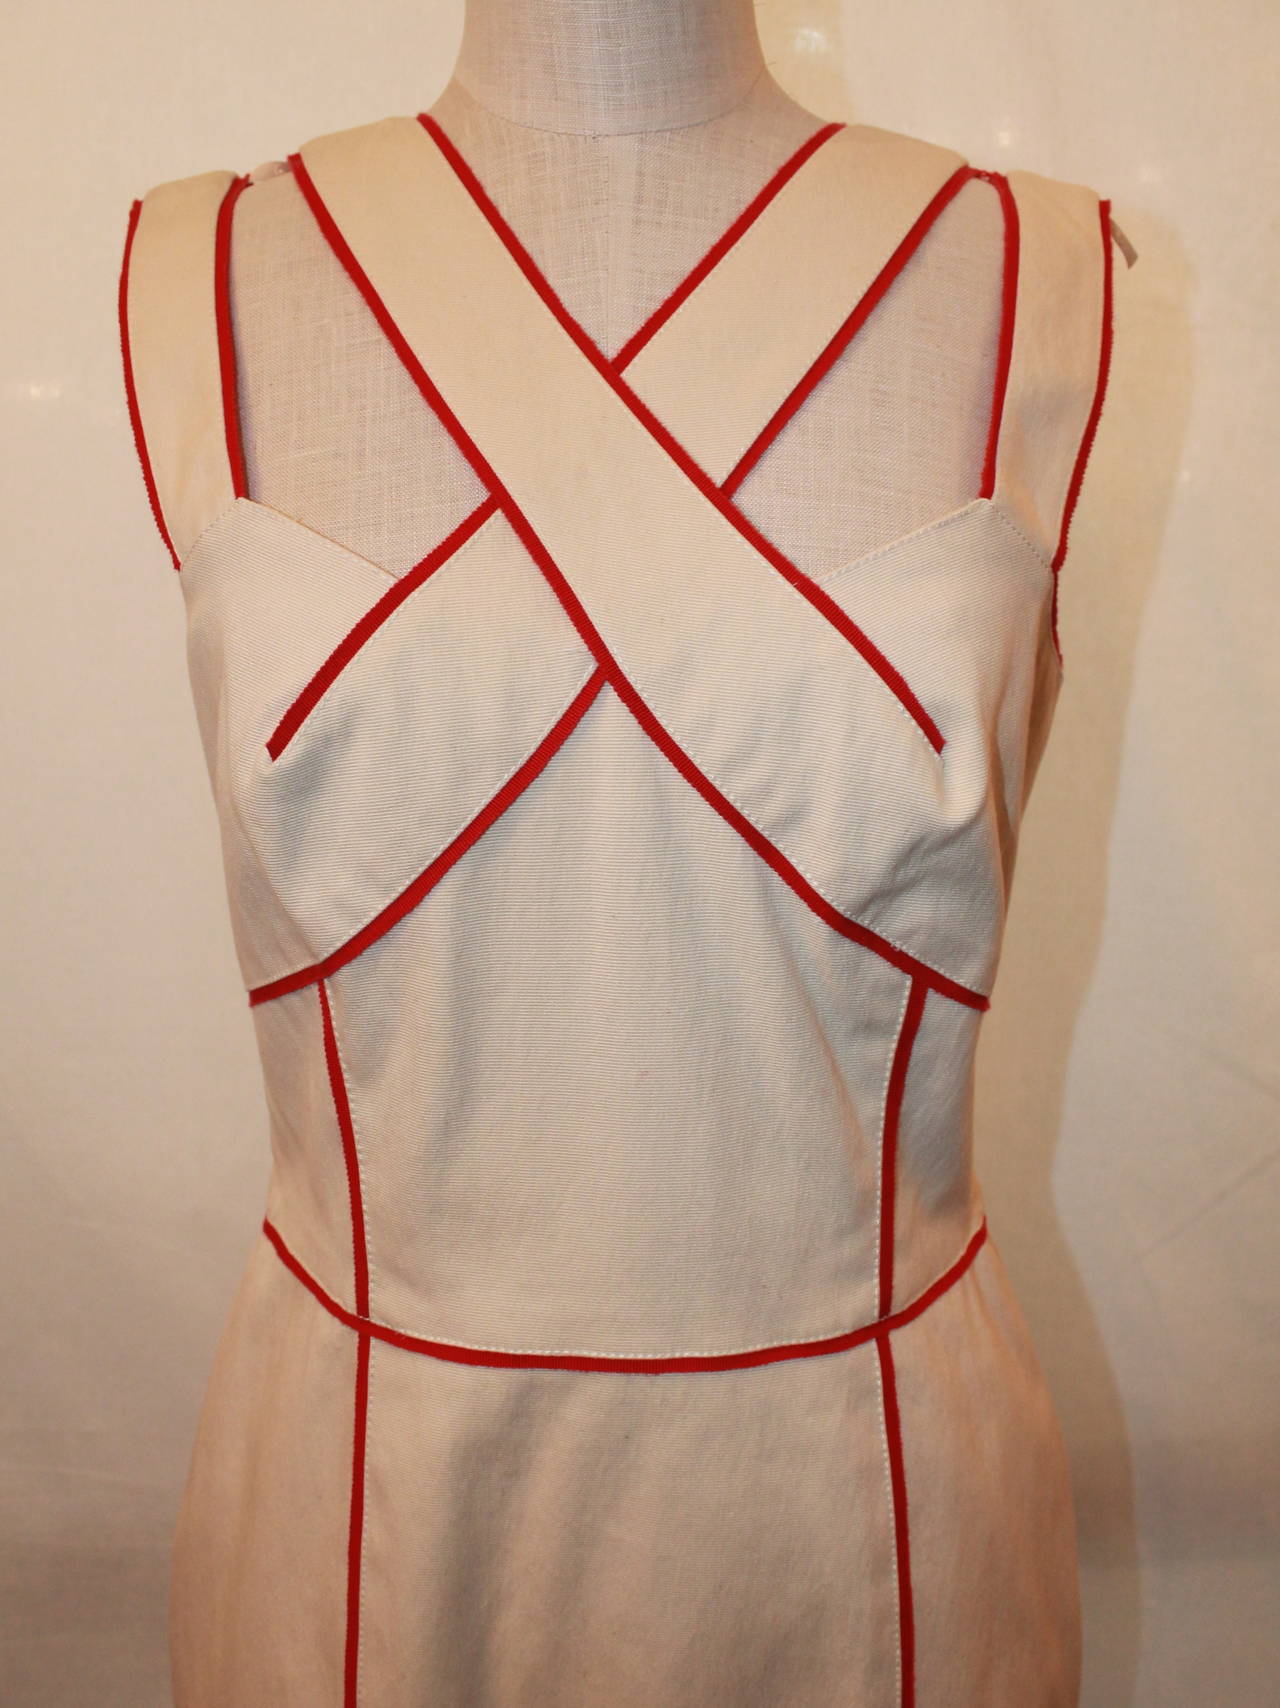 Oscar De La Renta Cream Dress with Red Trim - 10. This is dress is in impeccable condition.

Measurements:
Bust- 33